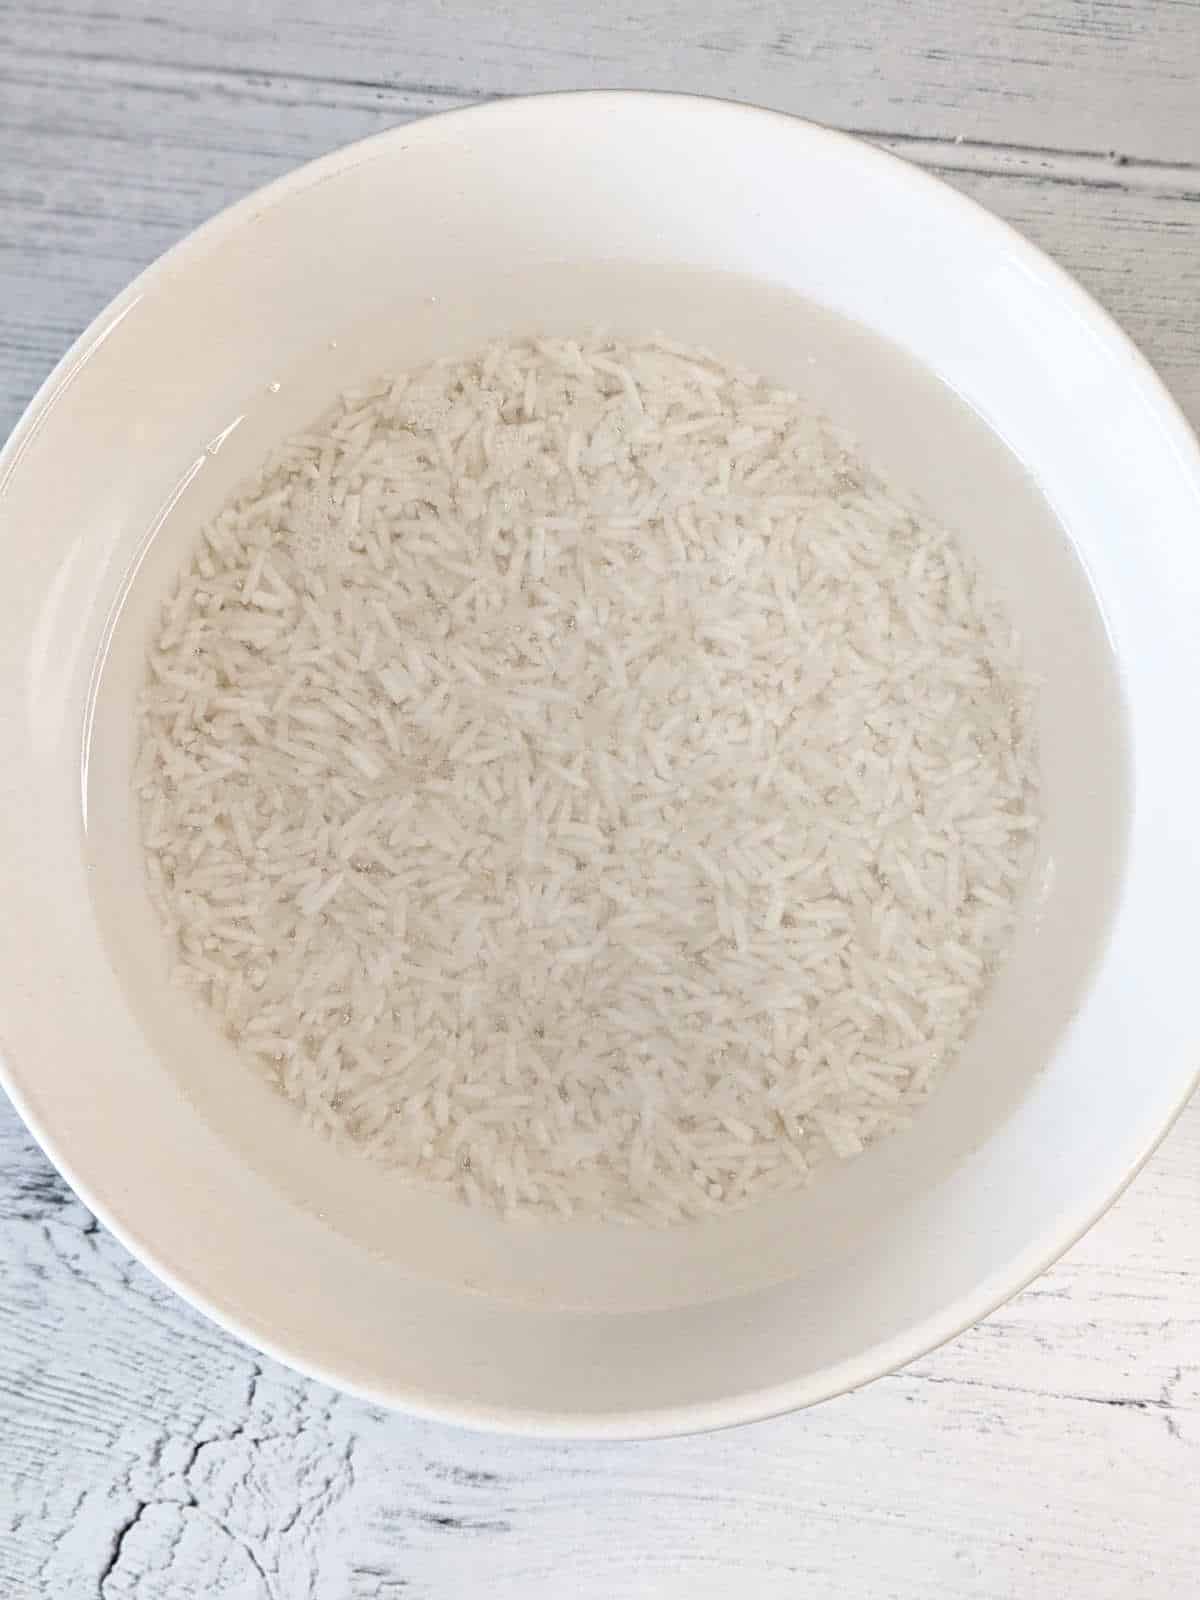 Rice soaking in a bowl with water.